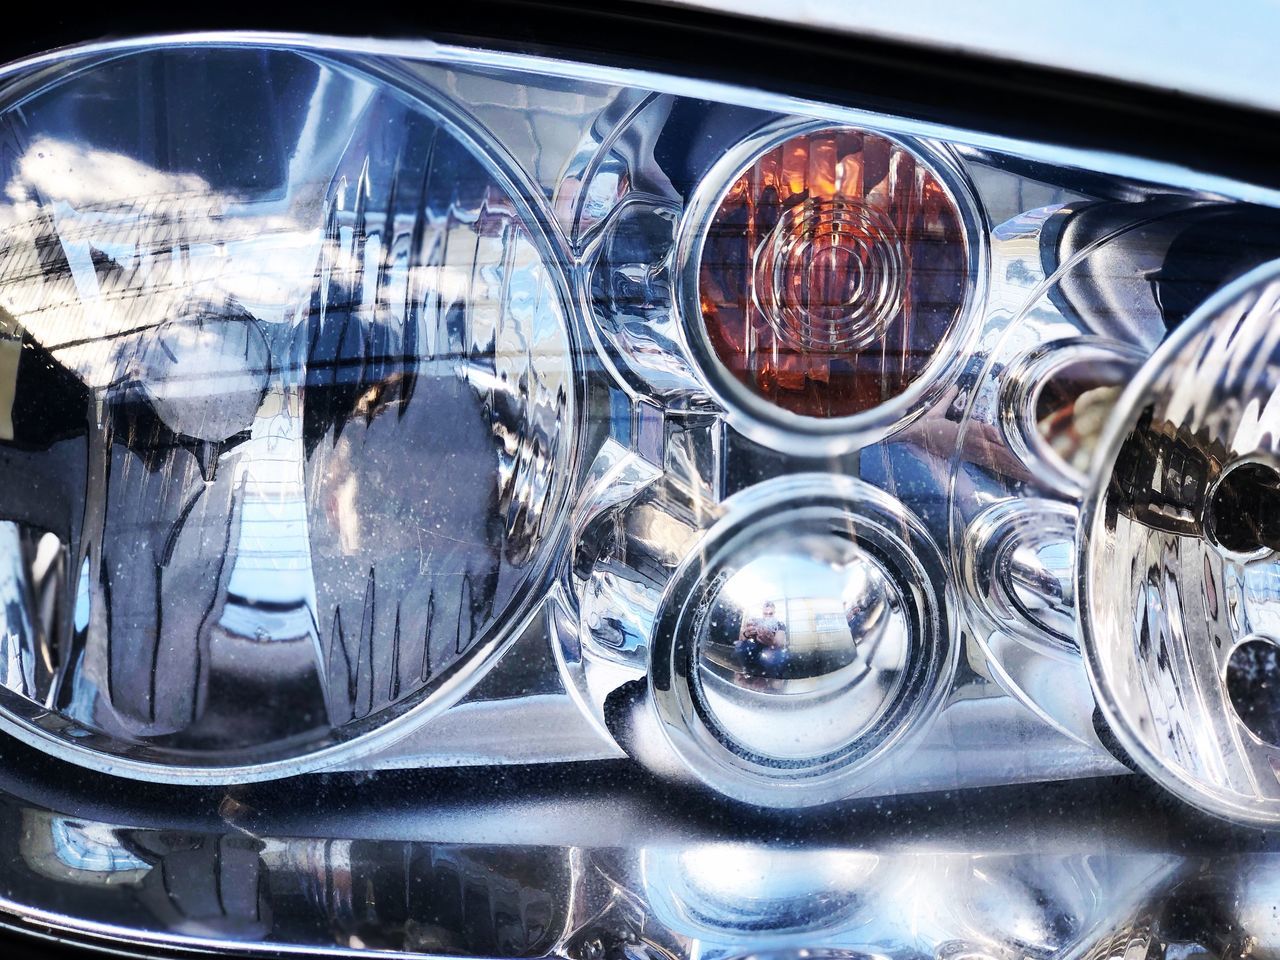 car, land vehicle, motor vehicle, mode of transportation, transportation, close-up, headlight, glass - material, reflection, no people, shiny, lighting equipment, day, transparent, metal, chrome, outdoors, retro styled, glass, vehicle light, silver colored